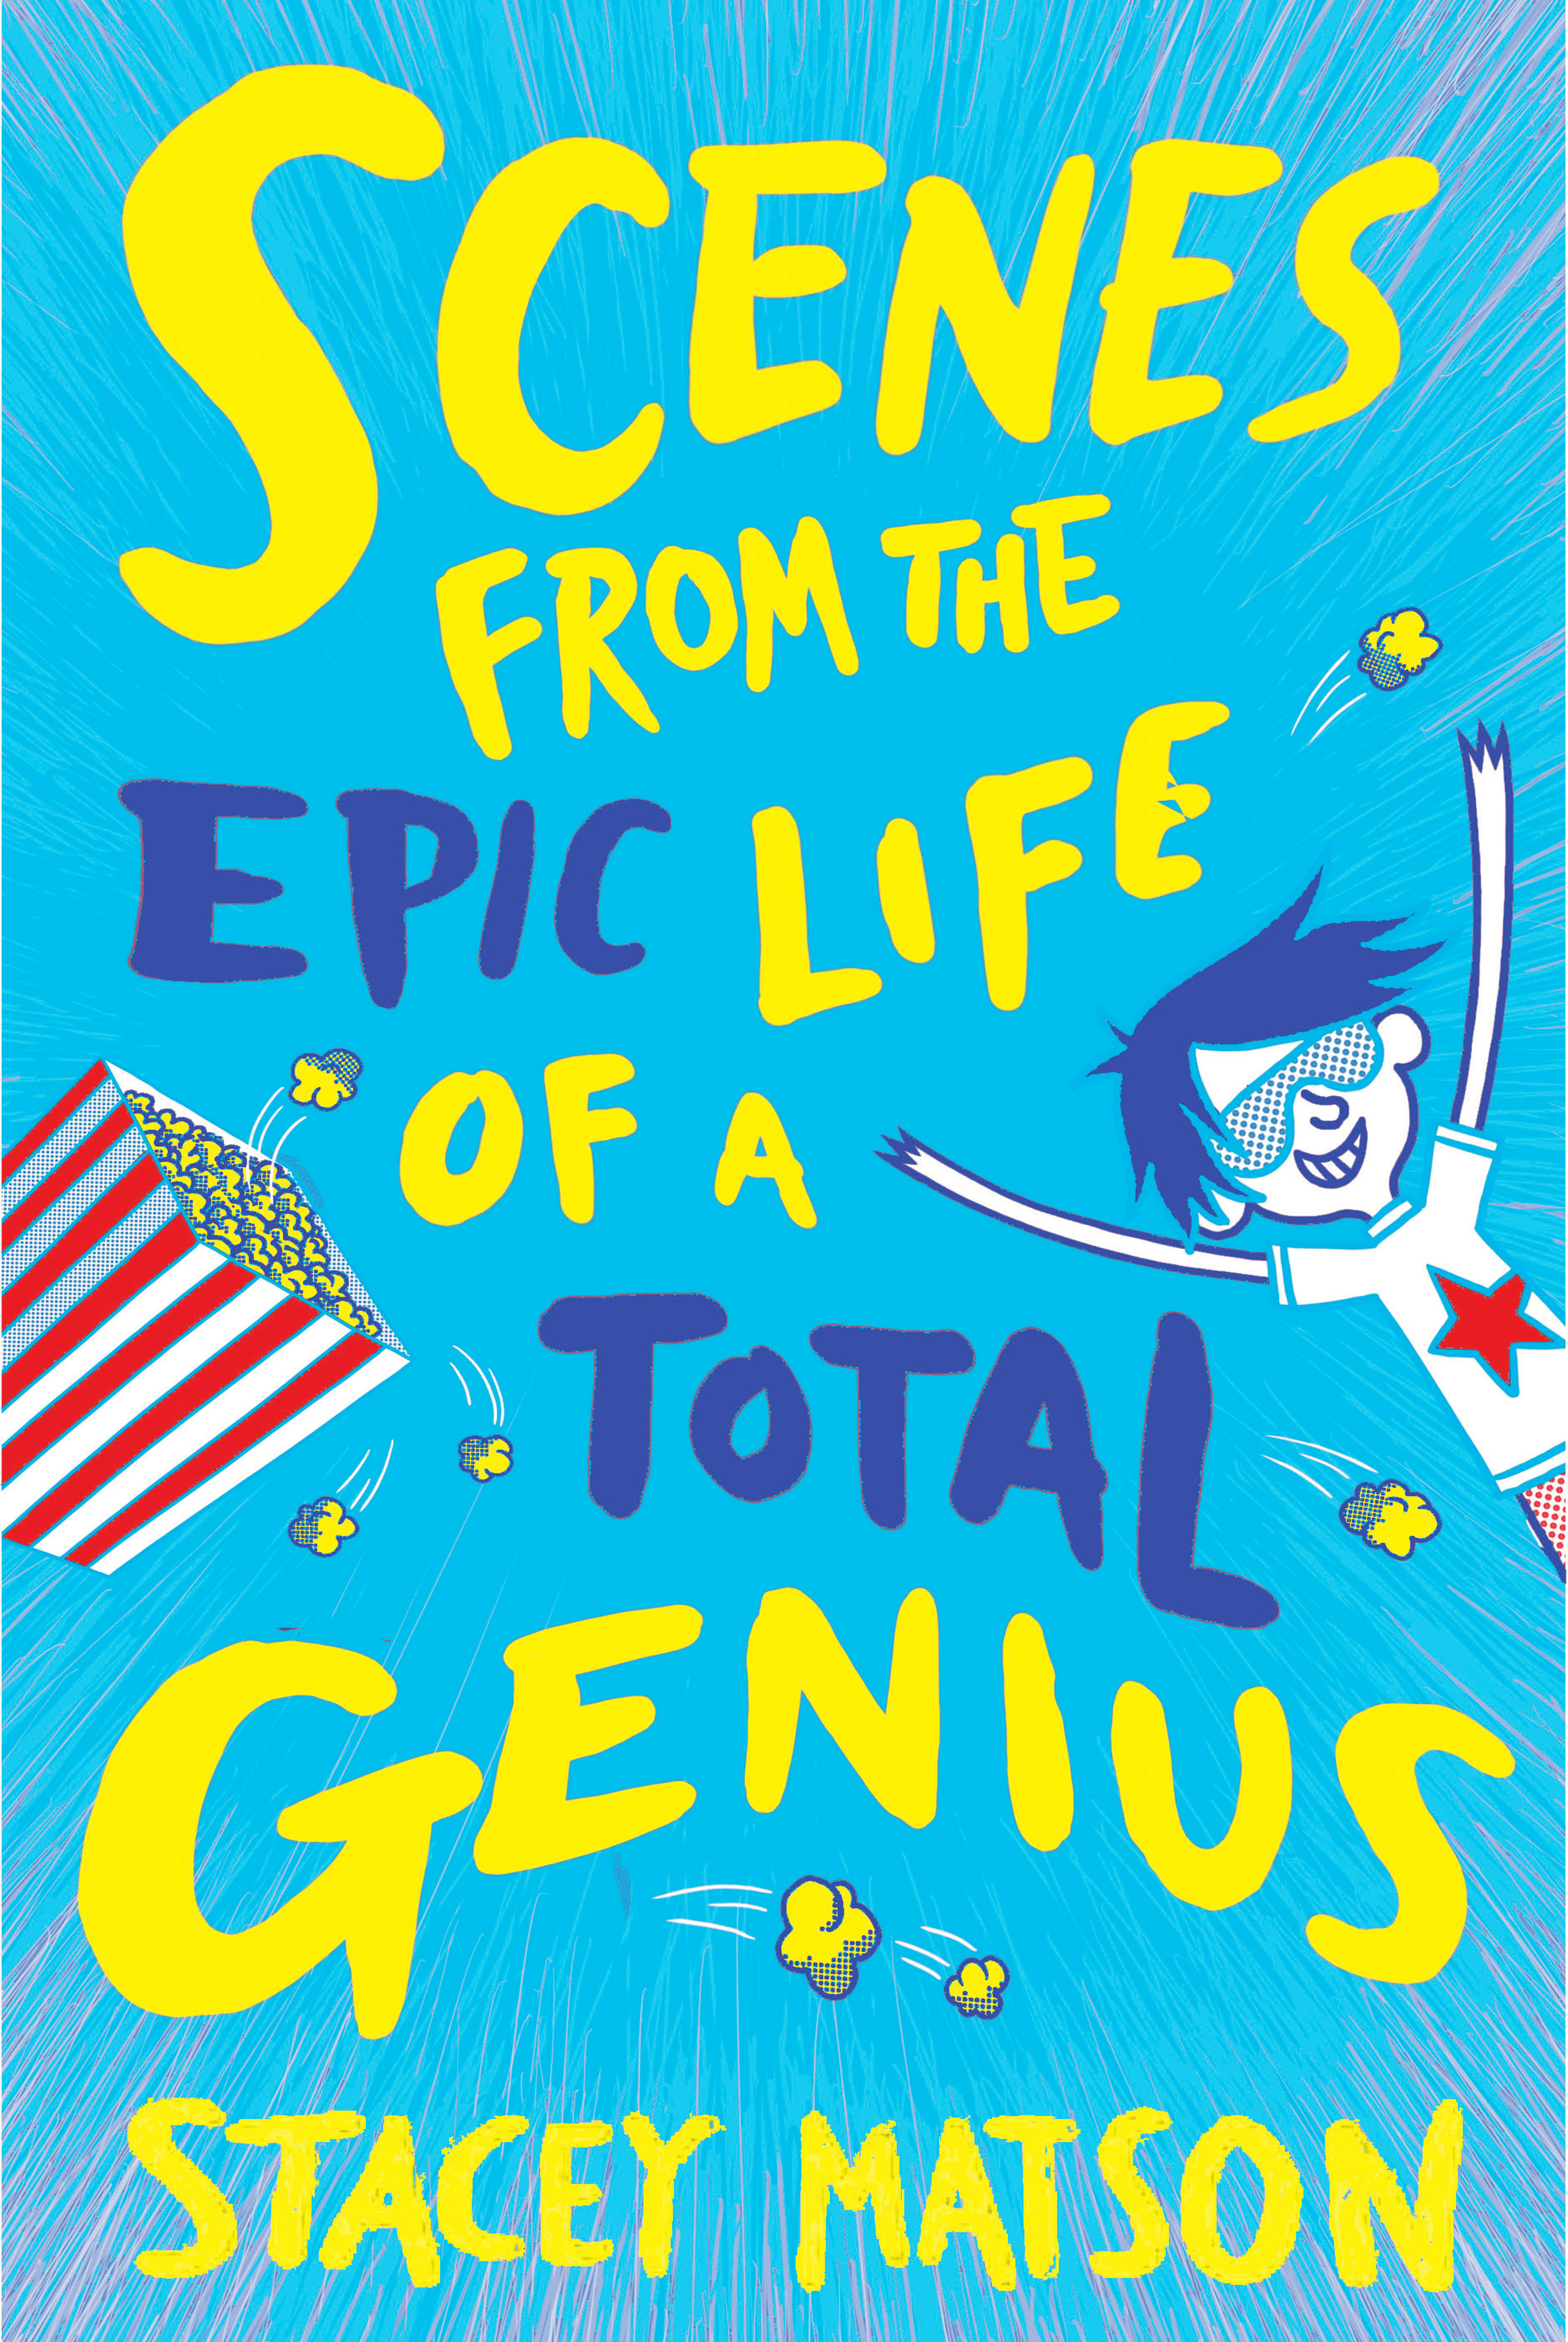 Scenes From the Epic Life of a Total Genius